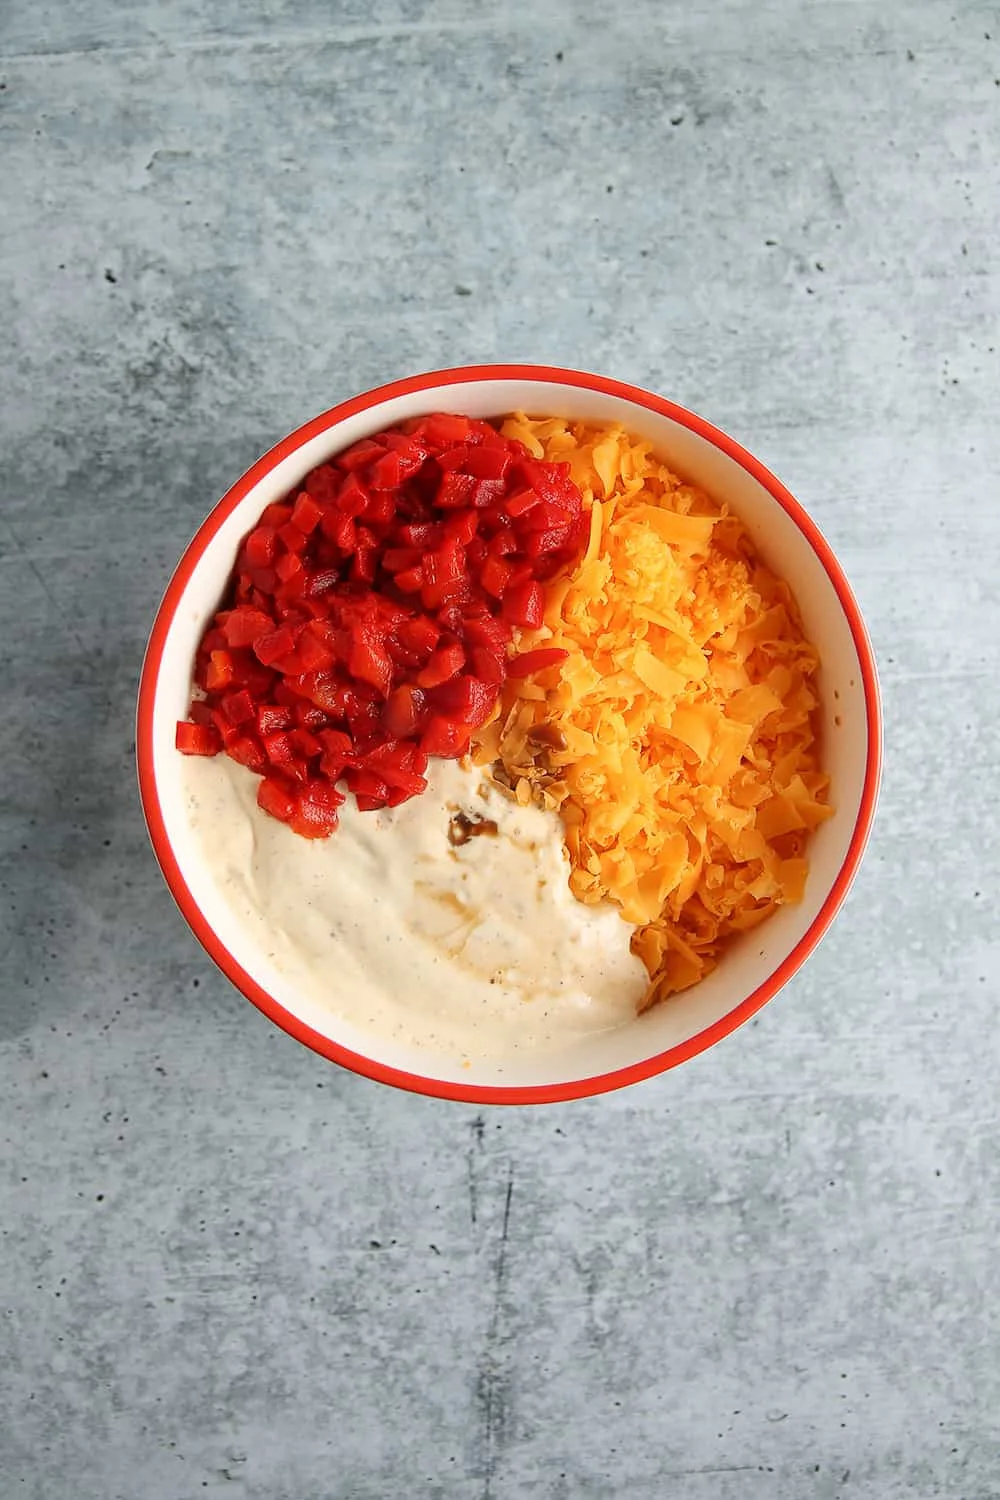 Overhead view of bowl with diced pimentos, shredded cheddar cheese and mayonnaise